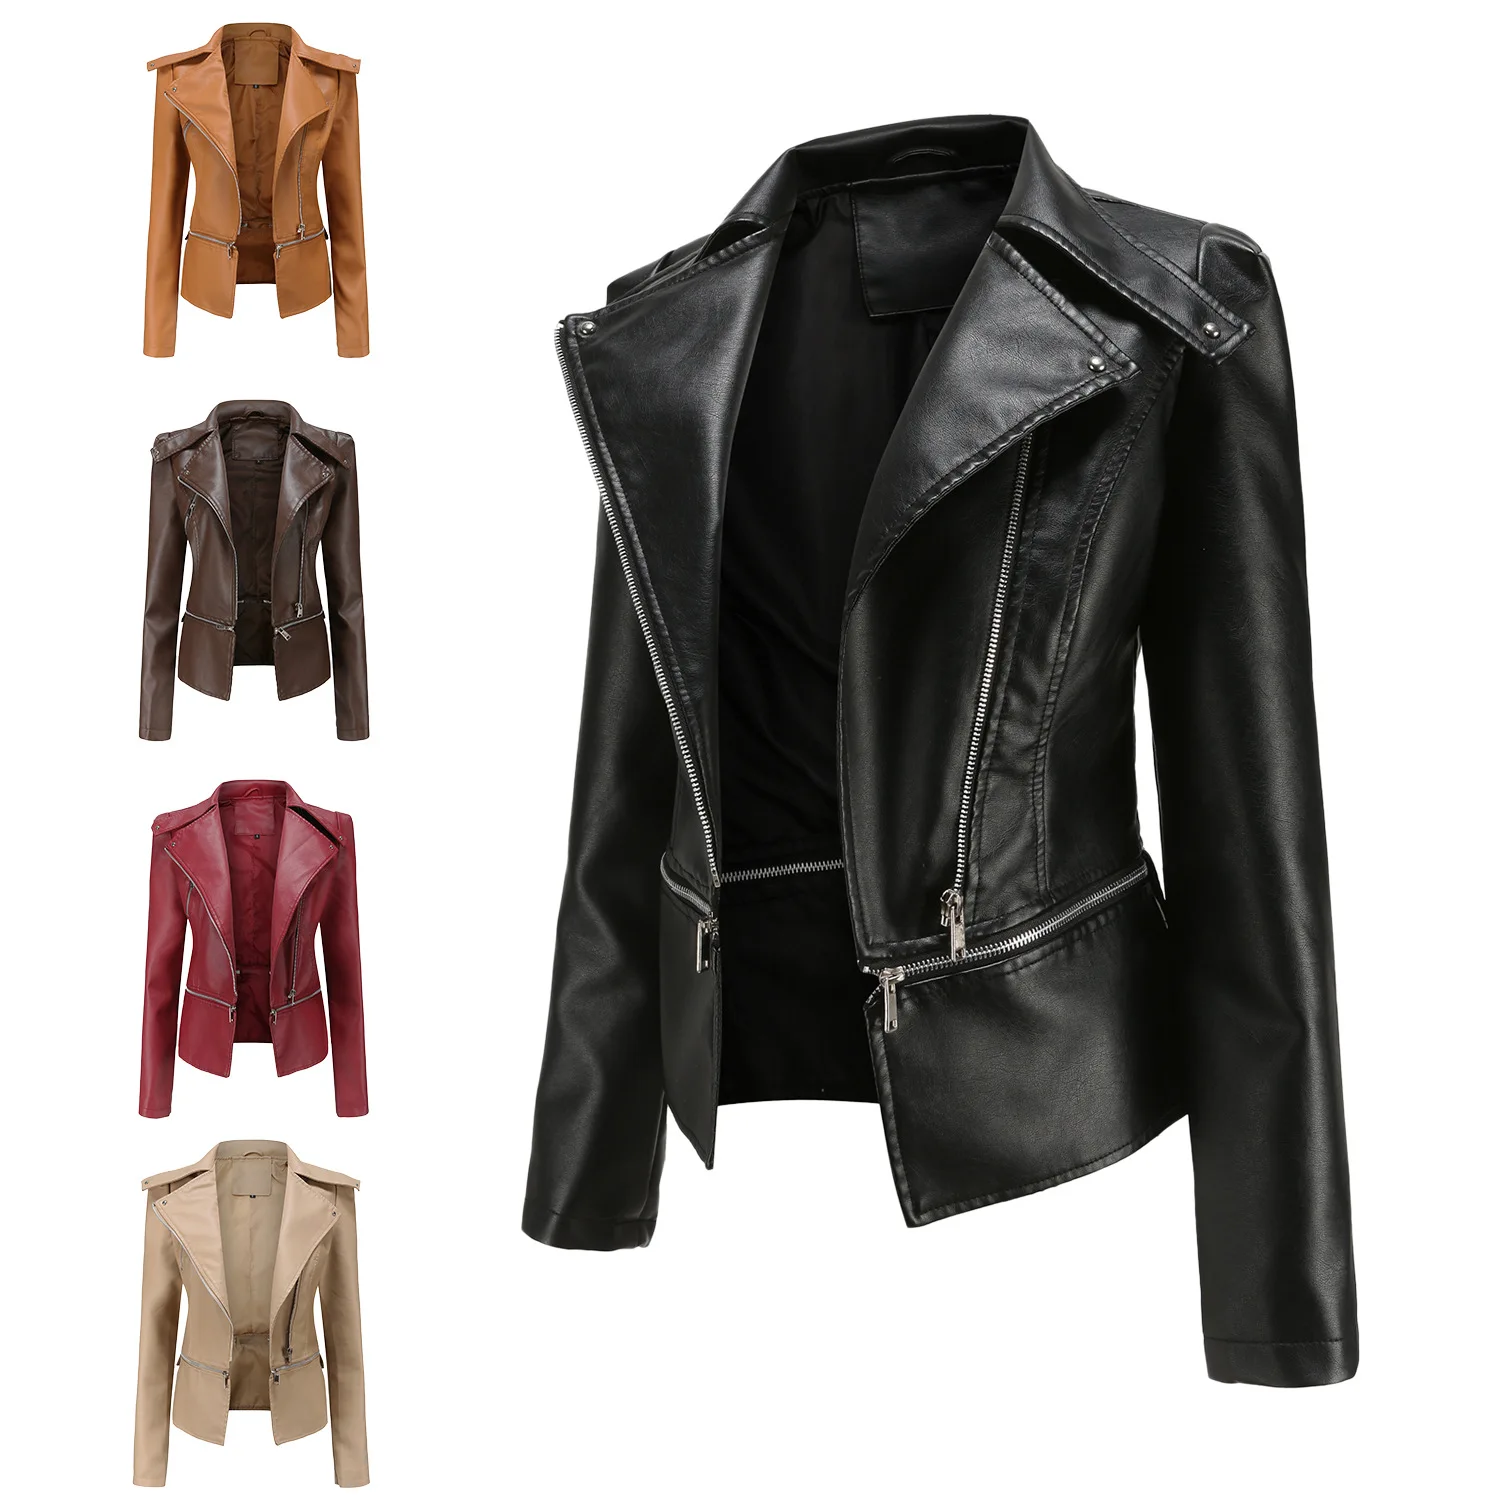 Women's New Leather Clothes Women's Hem Detachable Spring and Autumn Coat Women's Fashion Casual Jacket 2021 Sleeve Style Collar